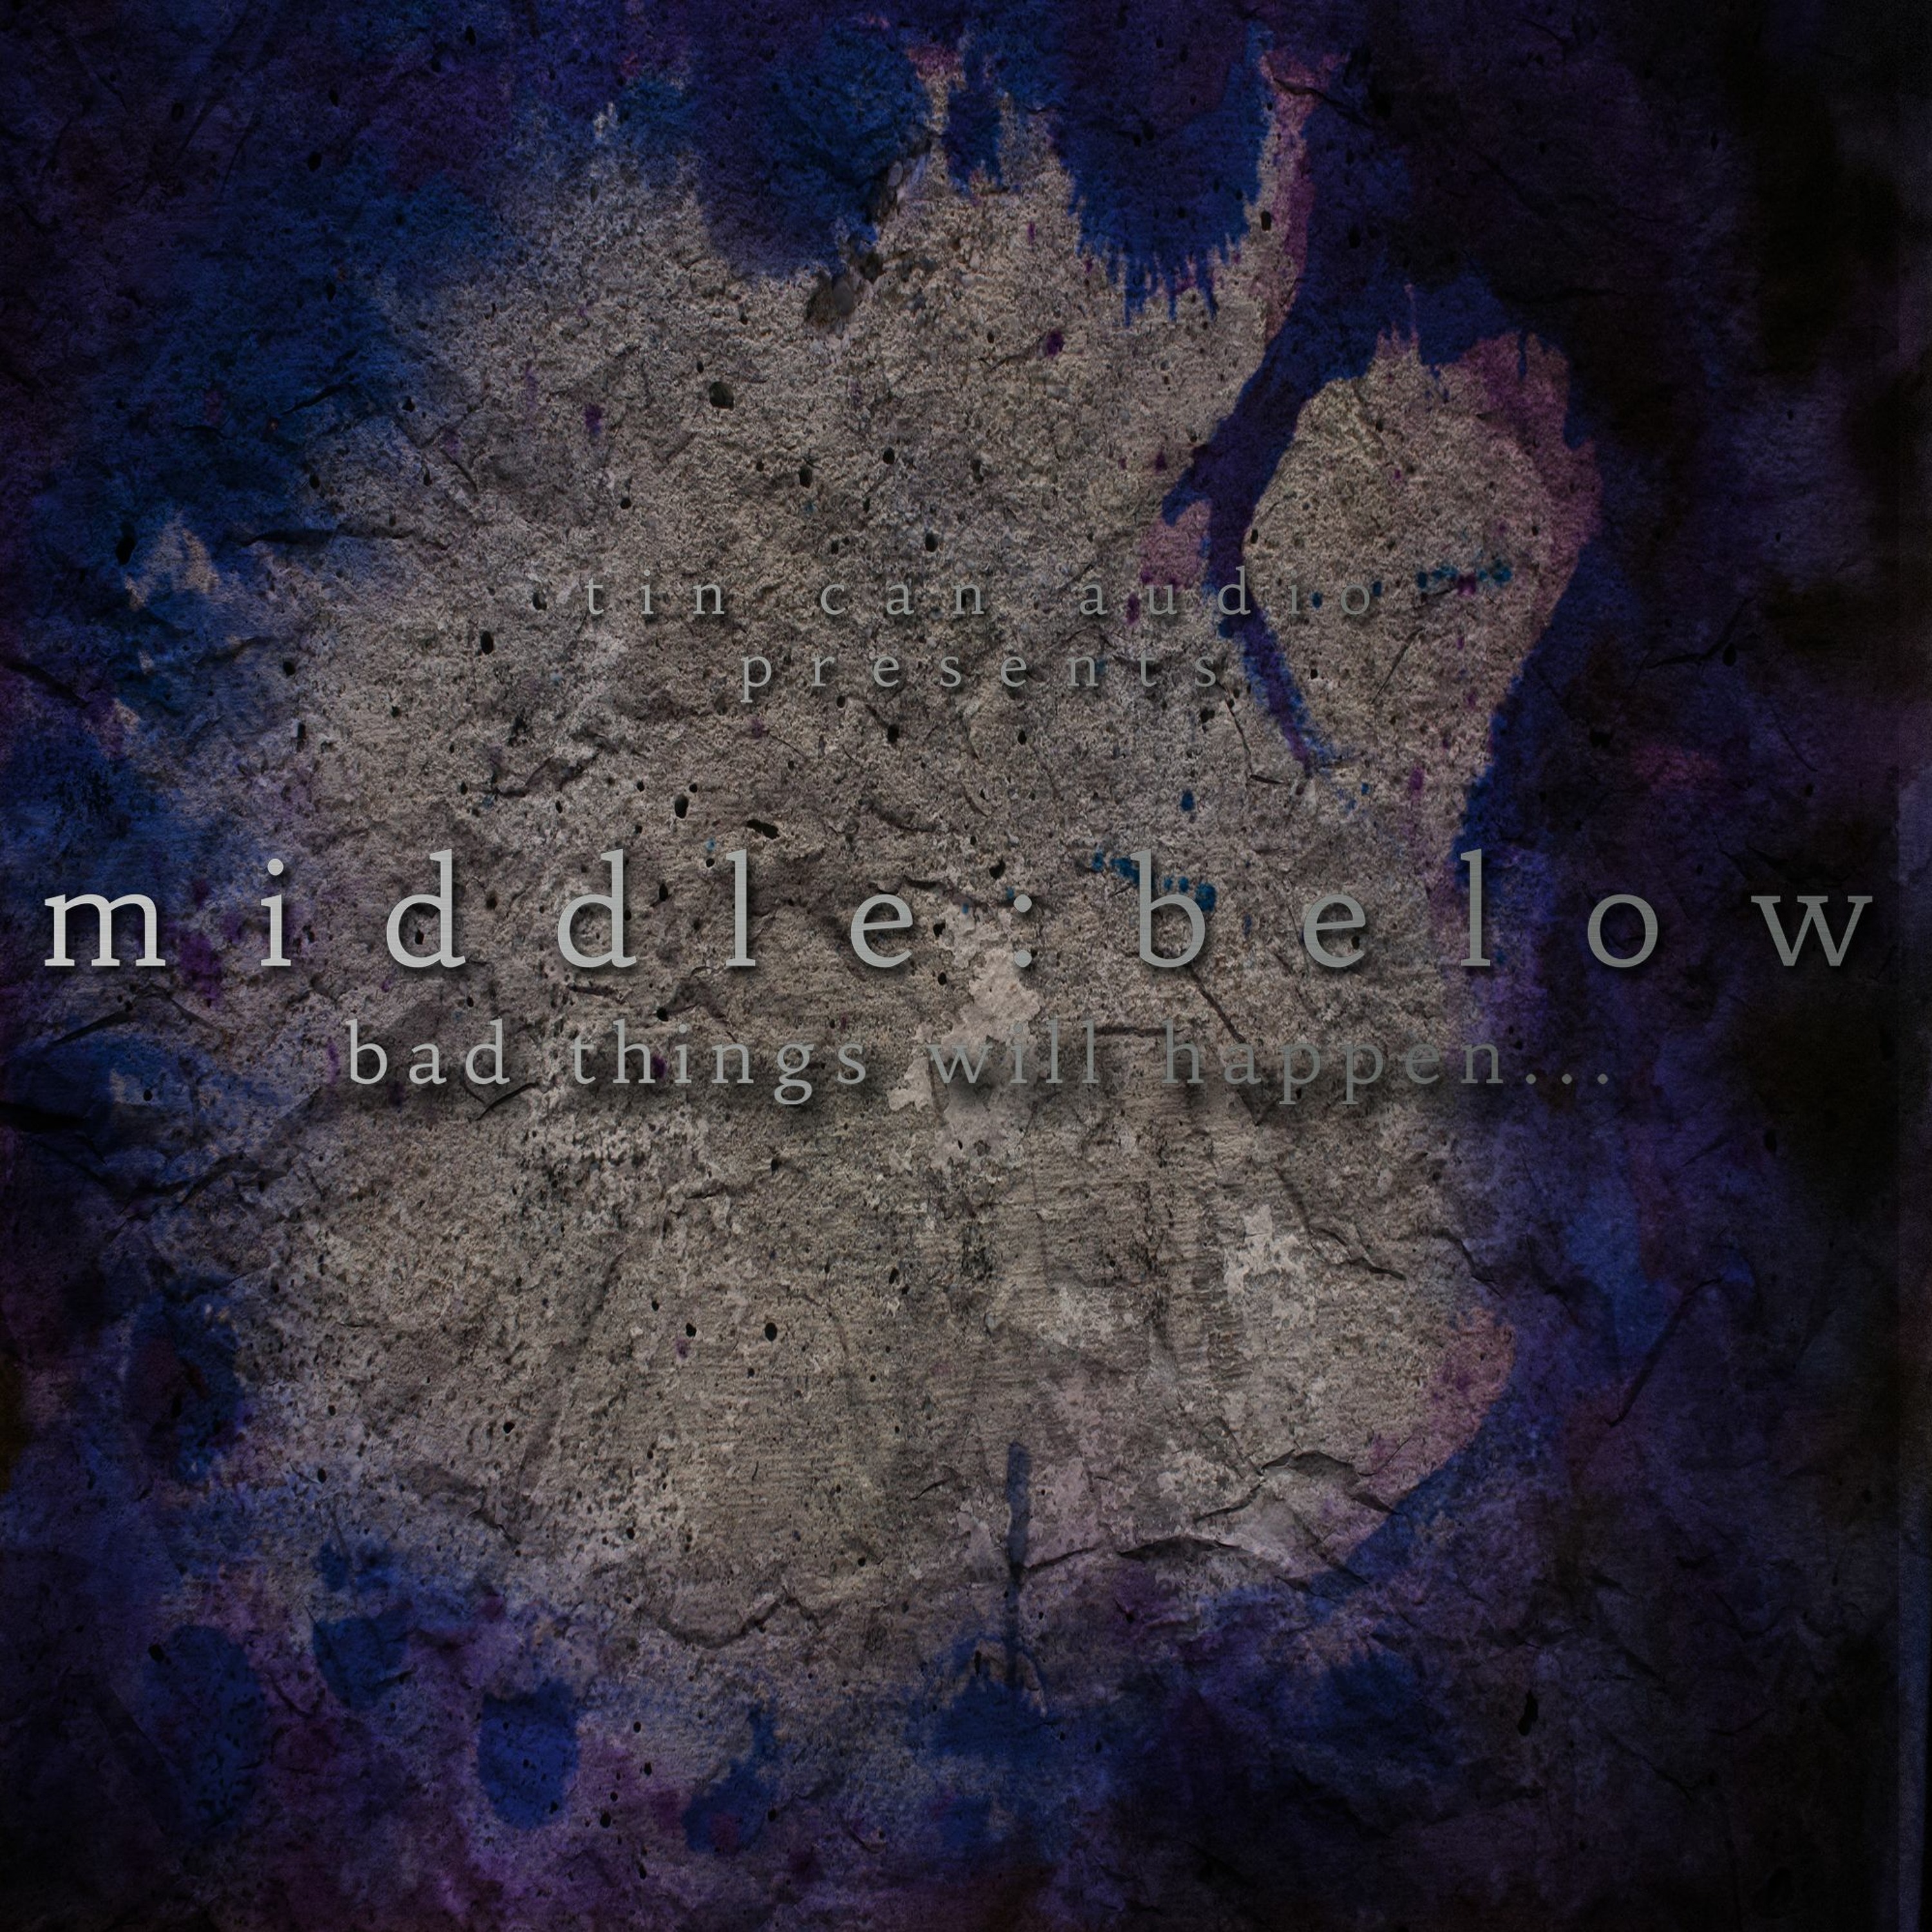 OUR NEW SHOW: Middle:Below Episode I - Continue